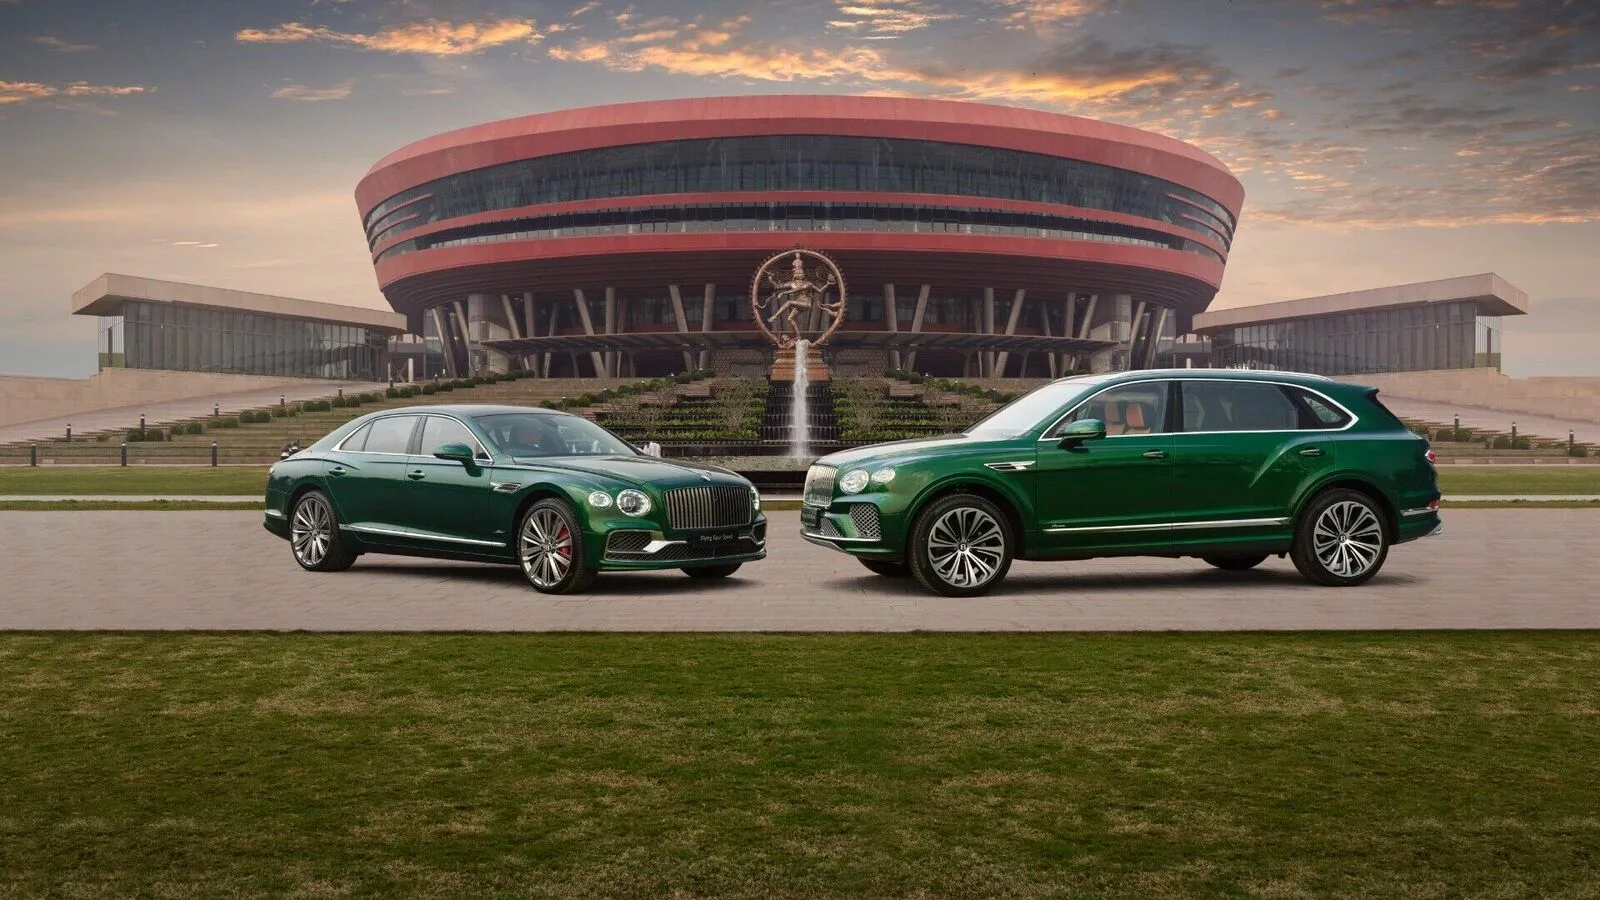 Bentley creates 5 bespoke Mulliner editions for India inspired by the tri-colour